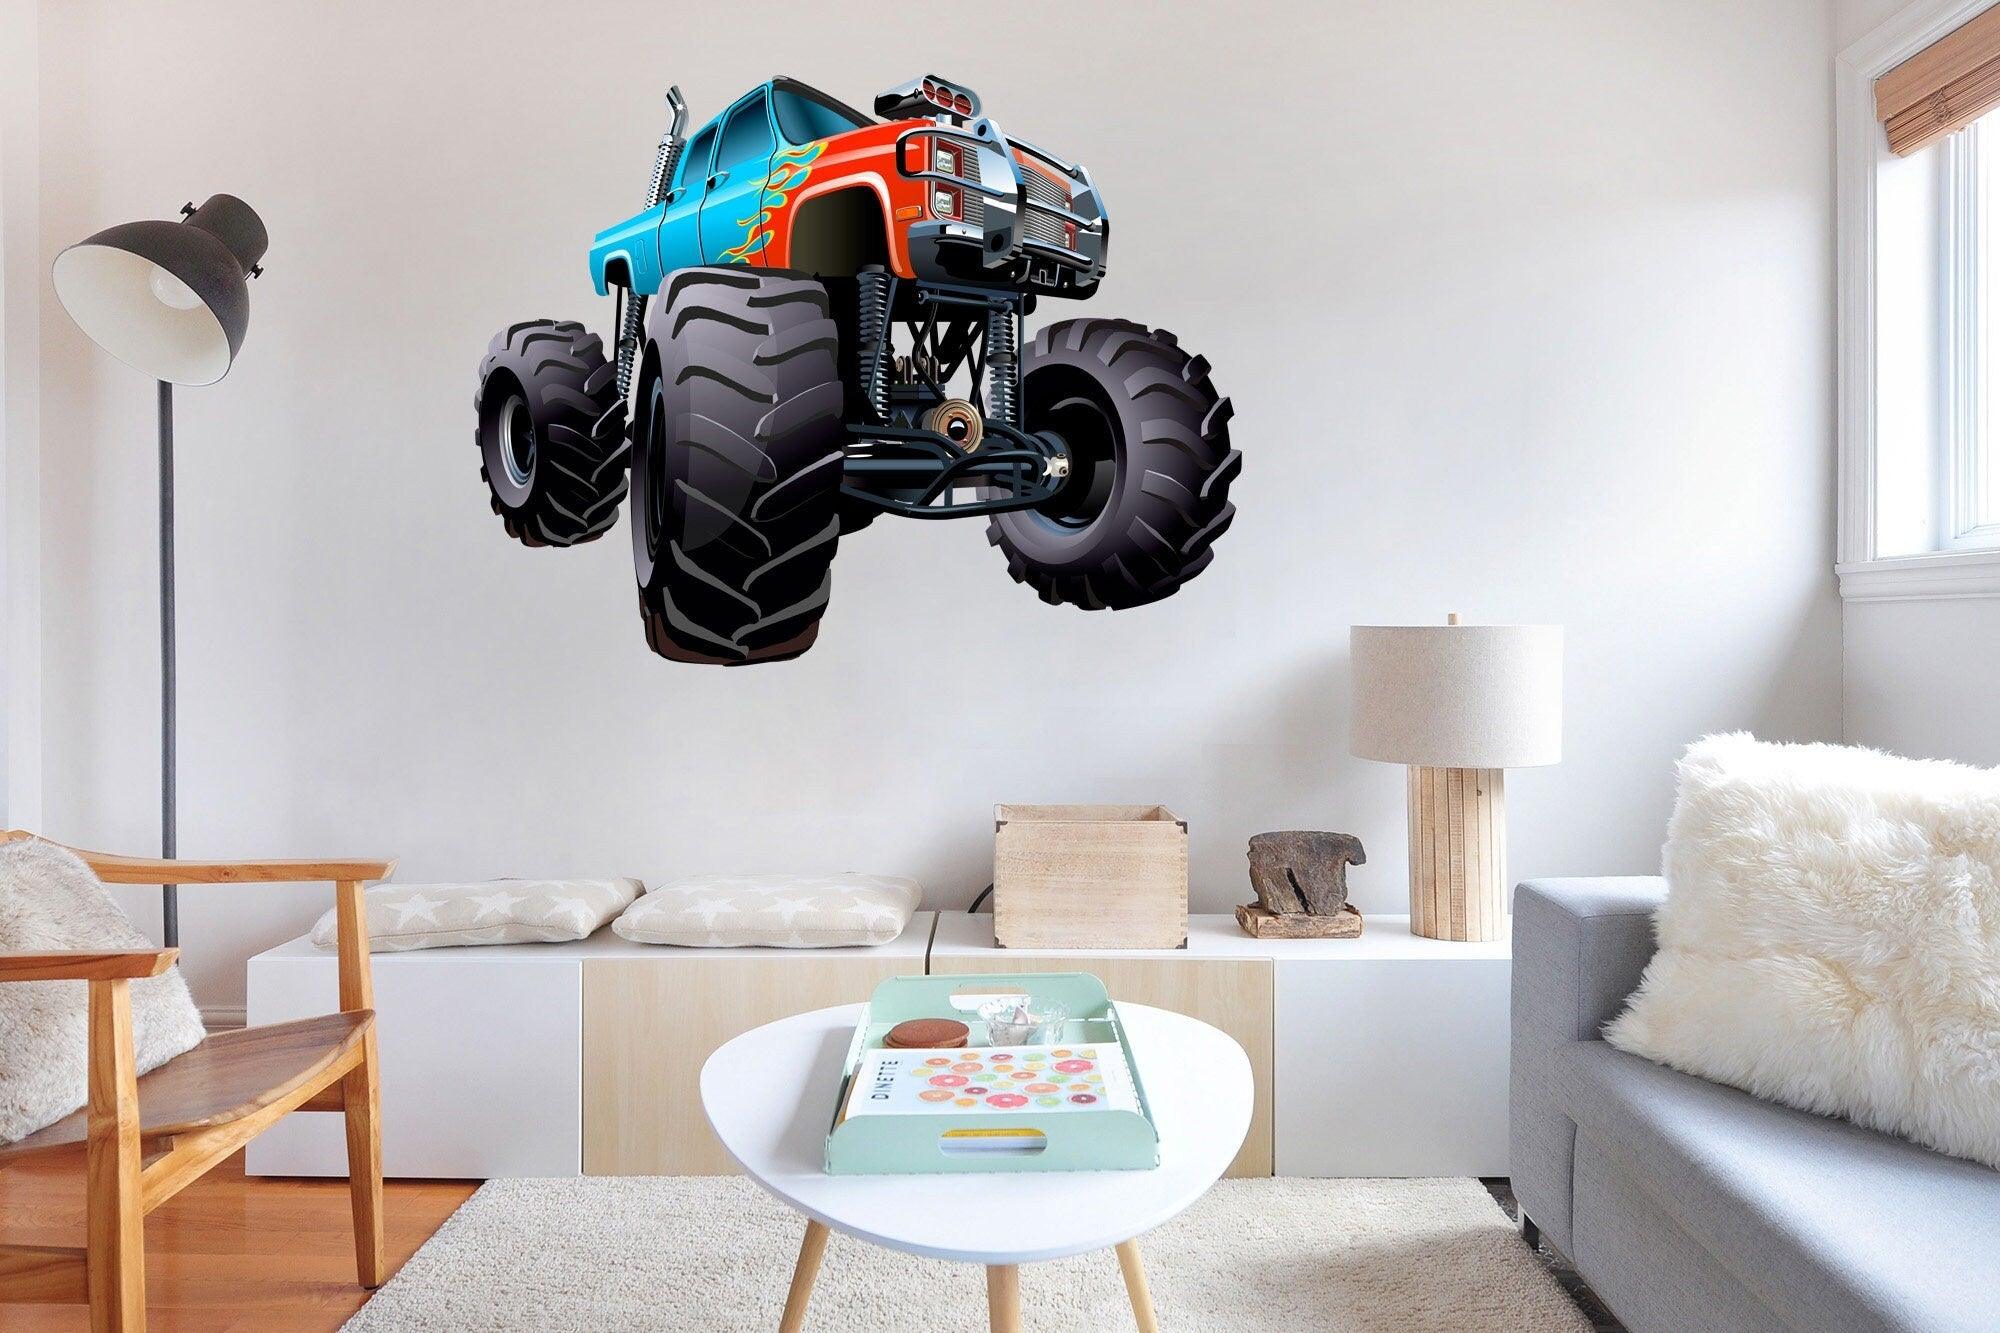 3D Monster Truck Wall Decal Sticker is 100% Removable 004